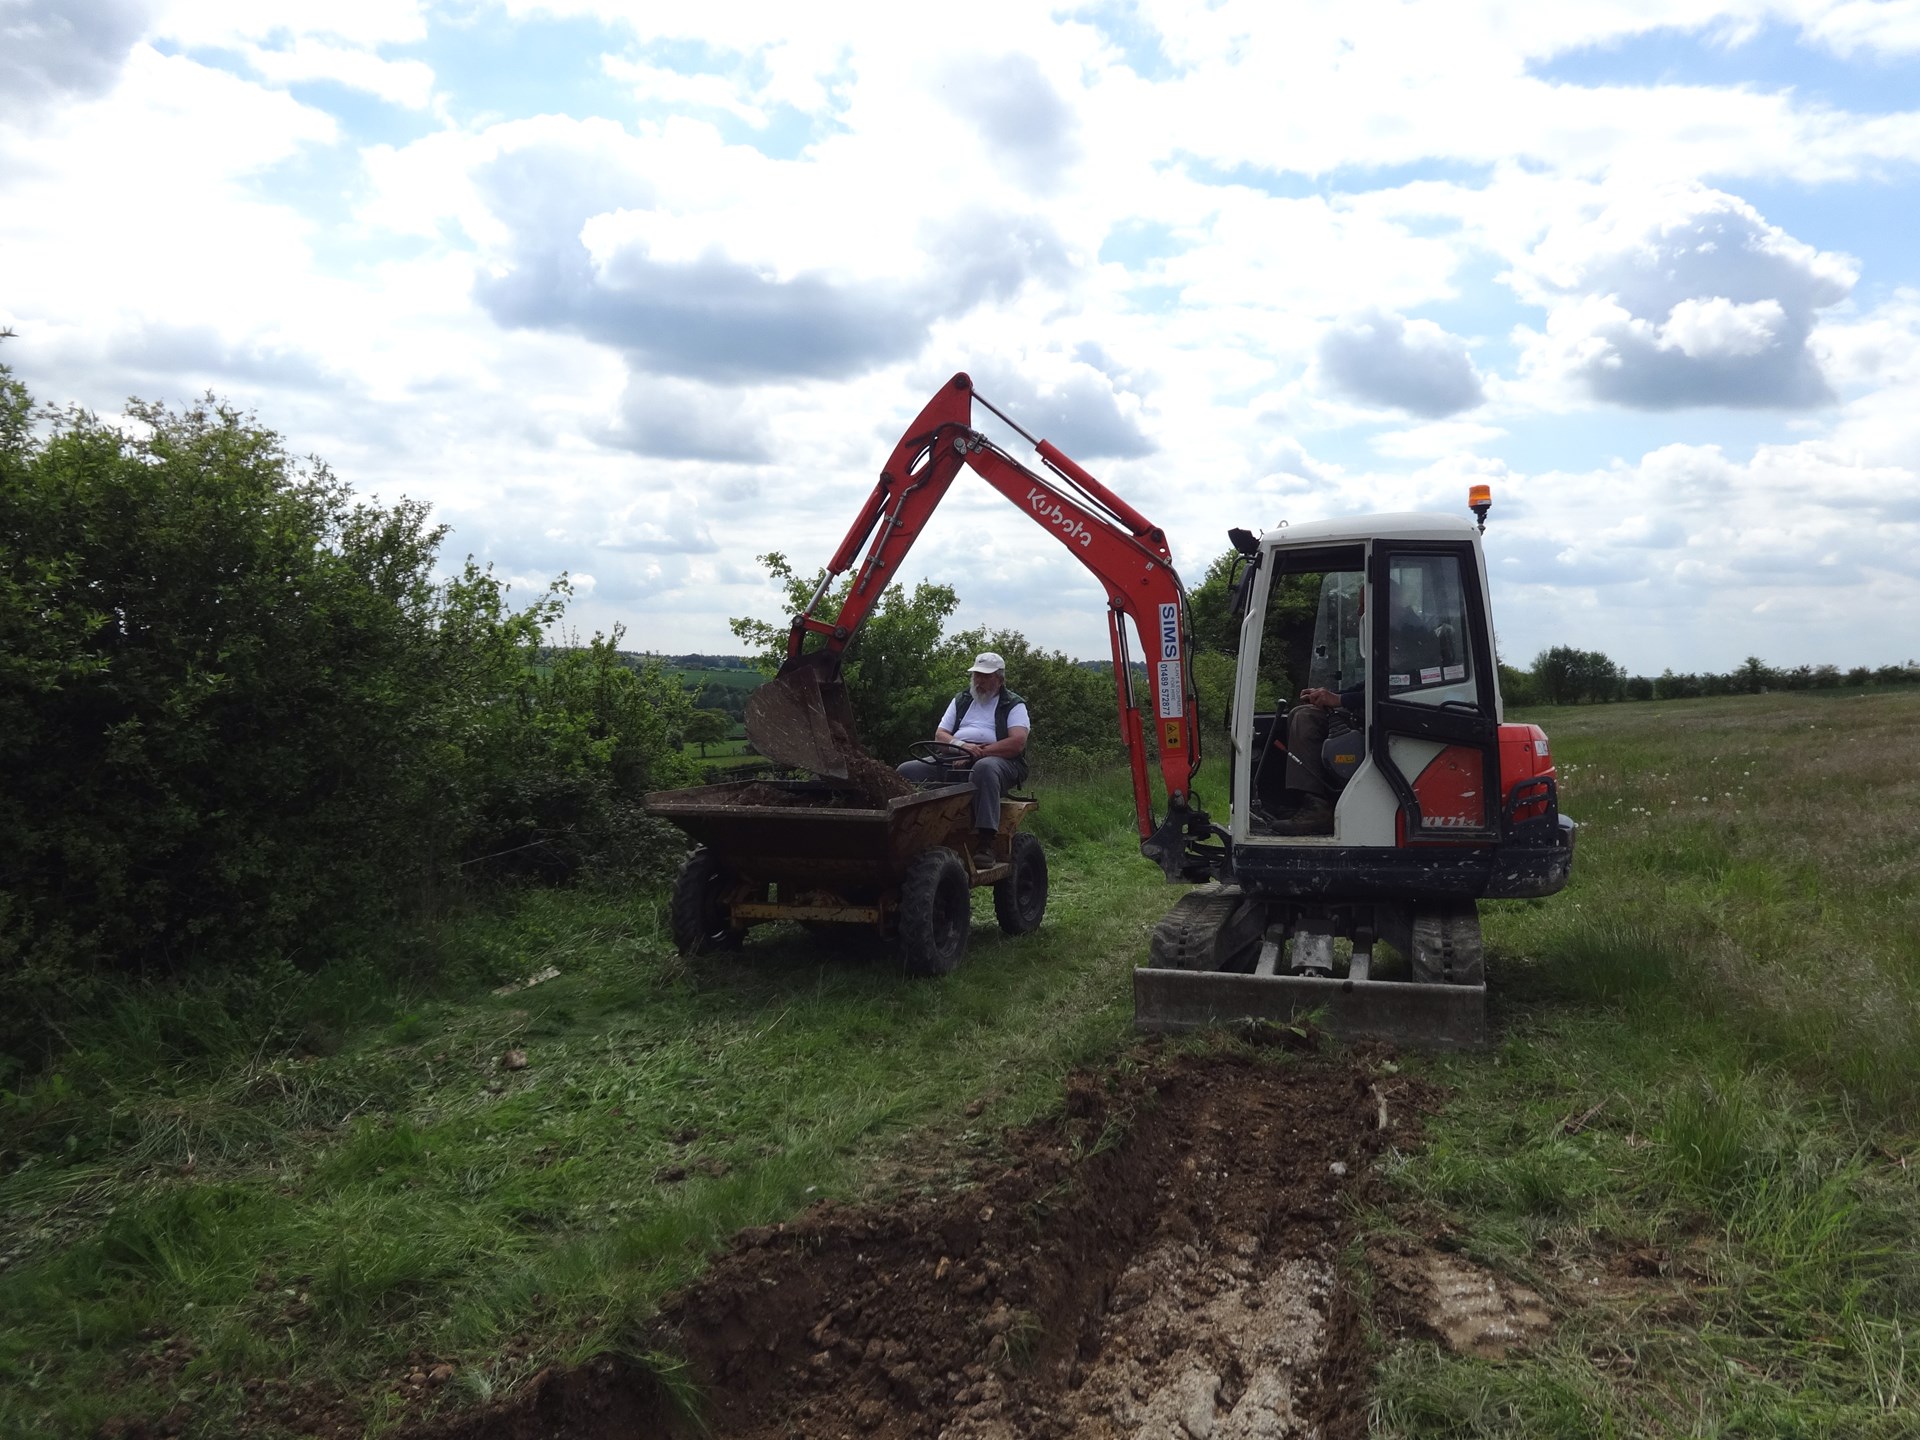 Brian in his Dumper receiving spoil from the trench dug out by Ben in the Mini Digger.